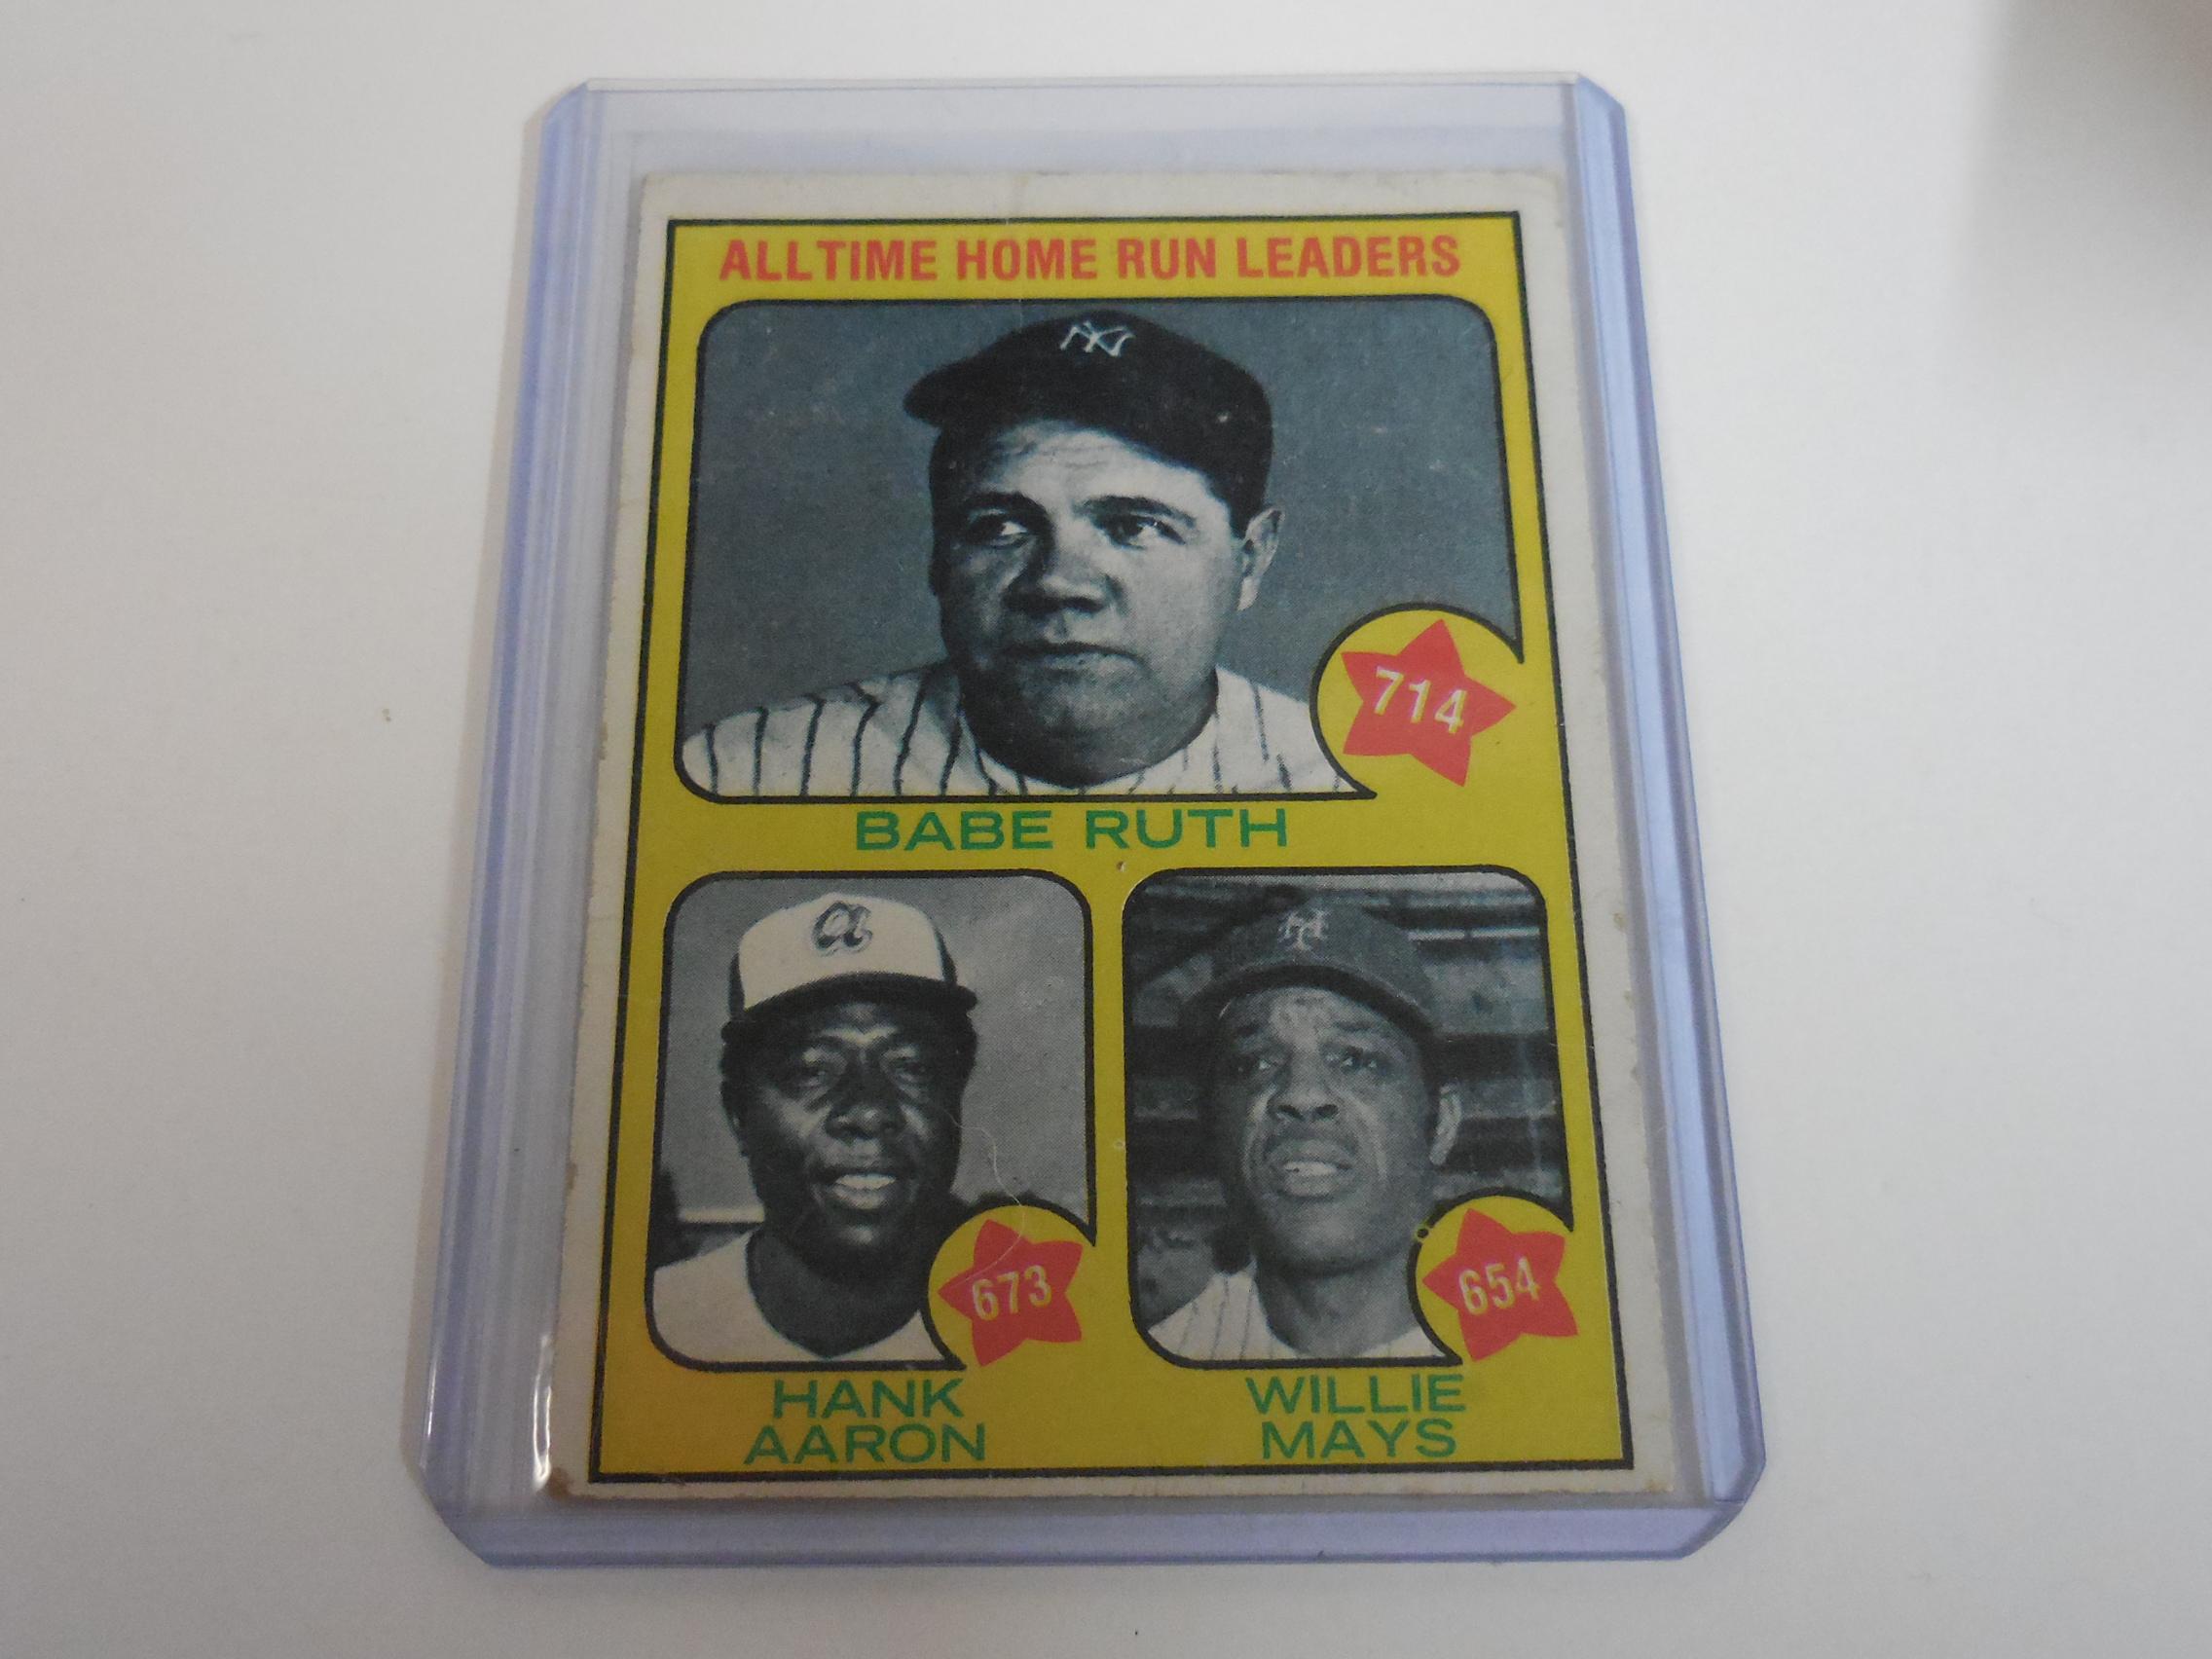 1973 TOPPS BASEBALL #1 ALL TIME HOME RUN LEADERS BABE RUTH HANK AARON WILLIE MAYS